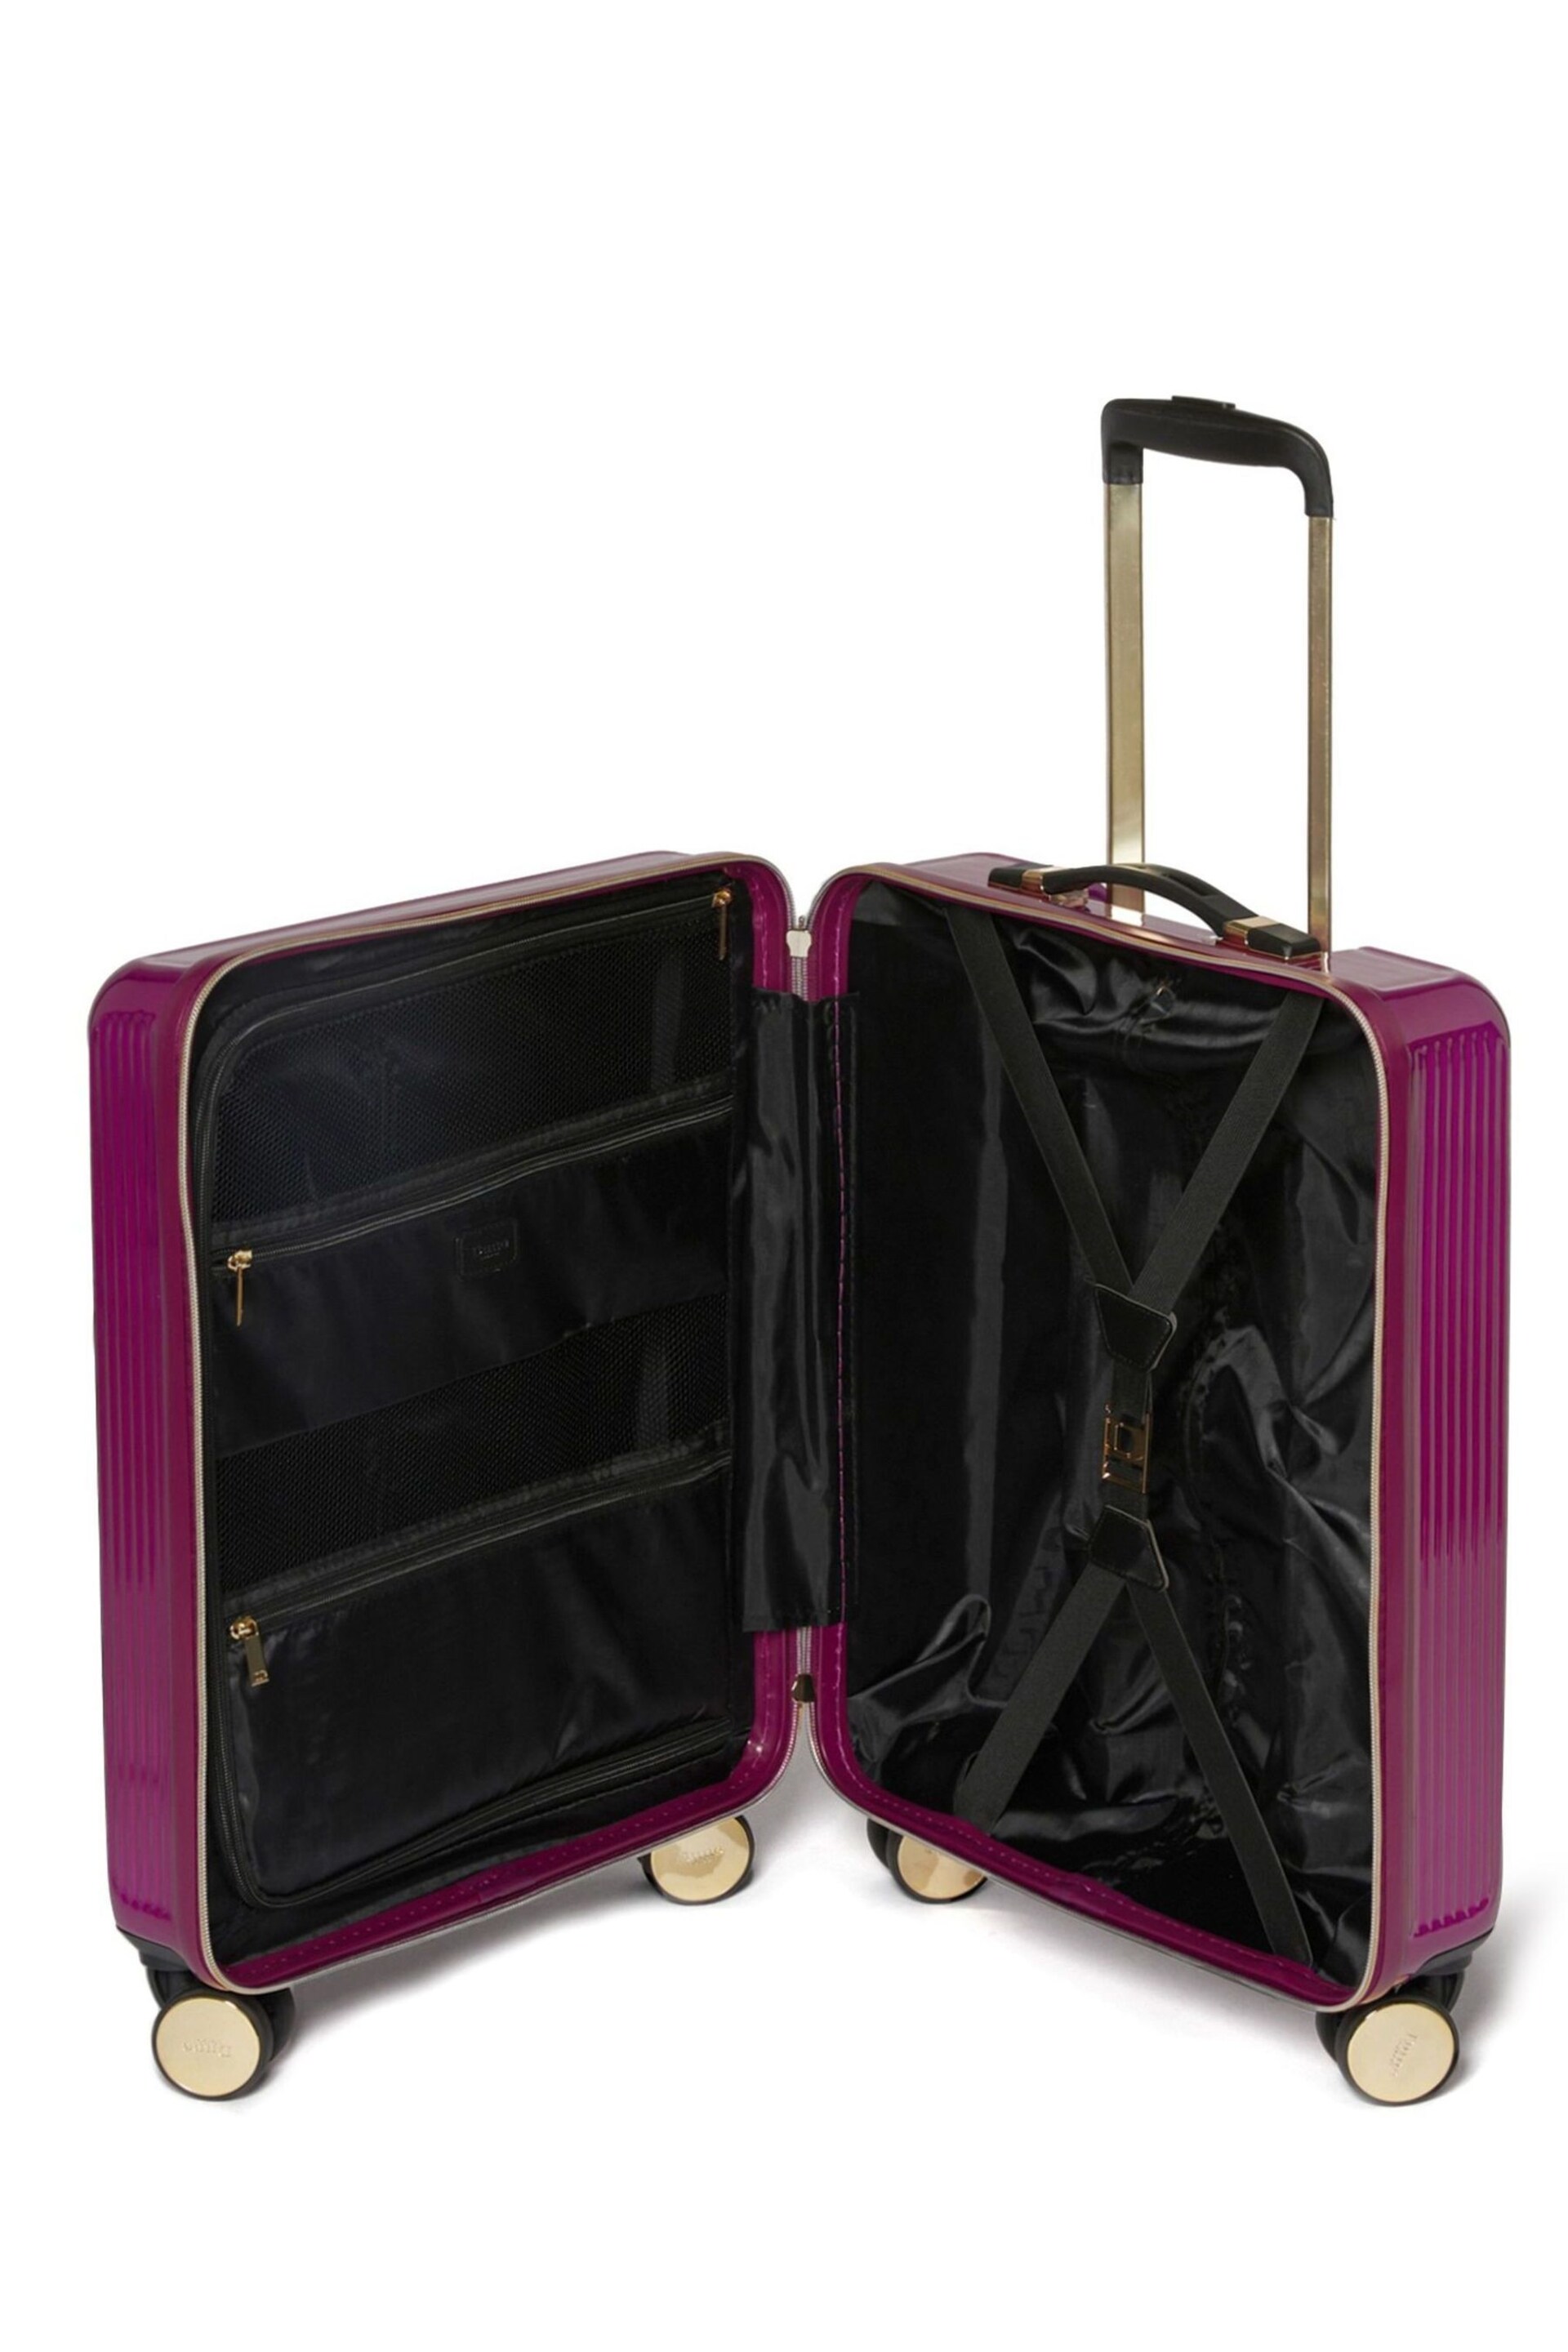 Dune London Pink Olive 55cm Cabin Suitcase - Image 4 of 5